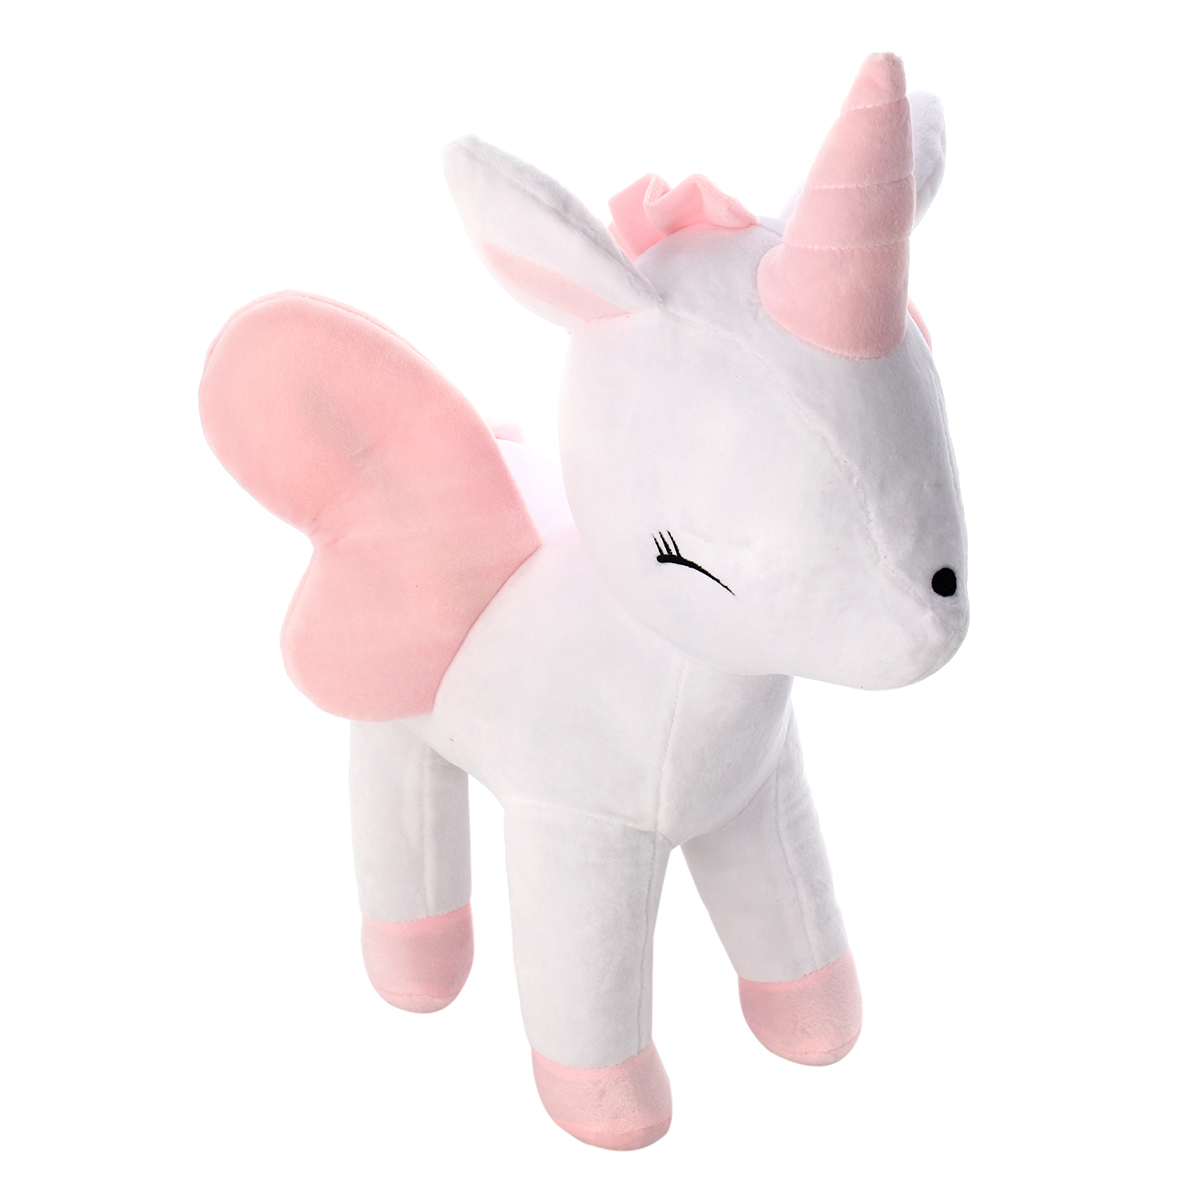 16-Inches-Soft-Giant-Unicorn-Stuffed-Plush-Toy-Animal-Doll-Children-Gifts-Photo-Props-Gift-1299365-7